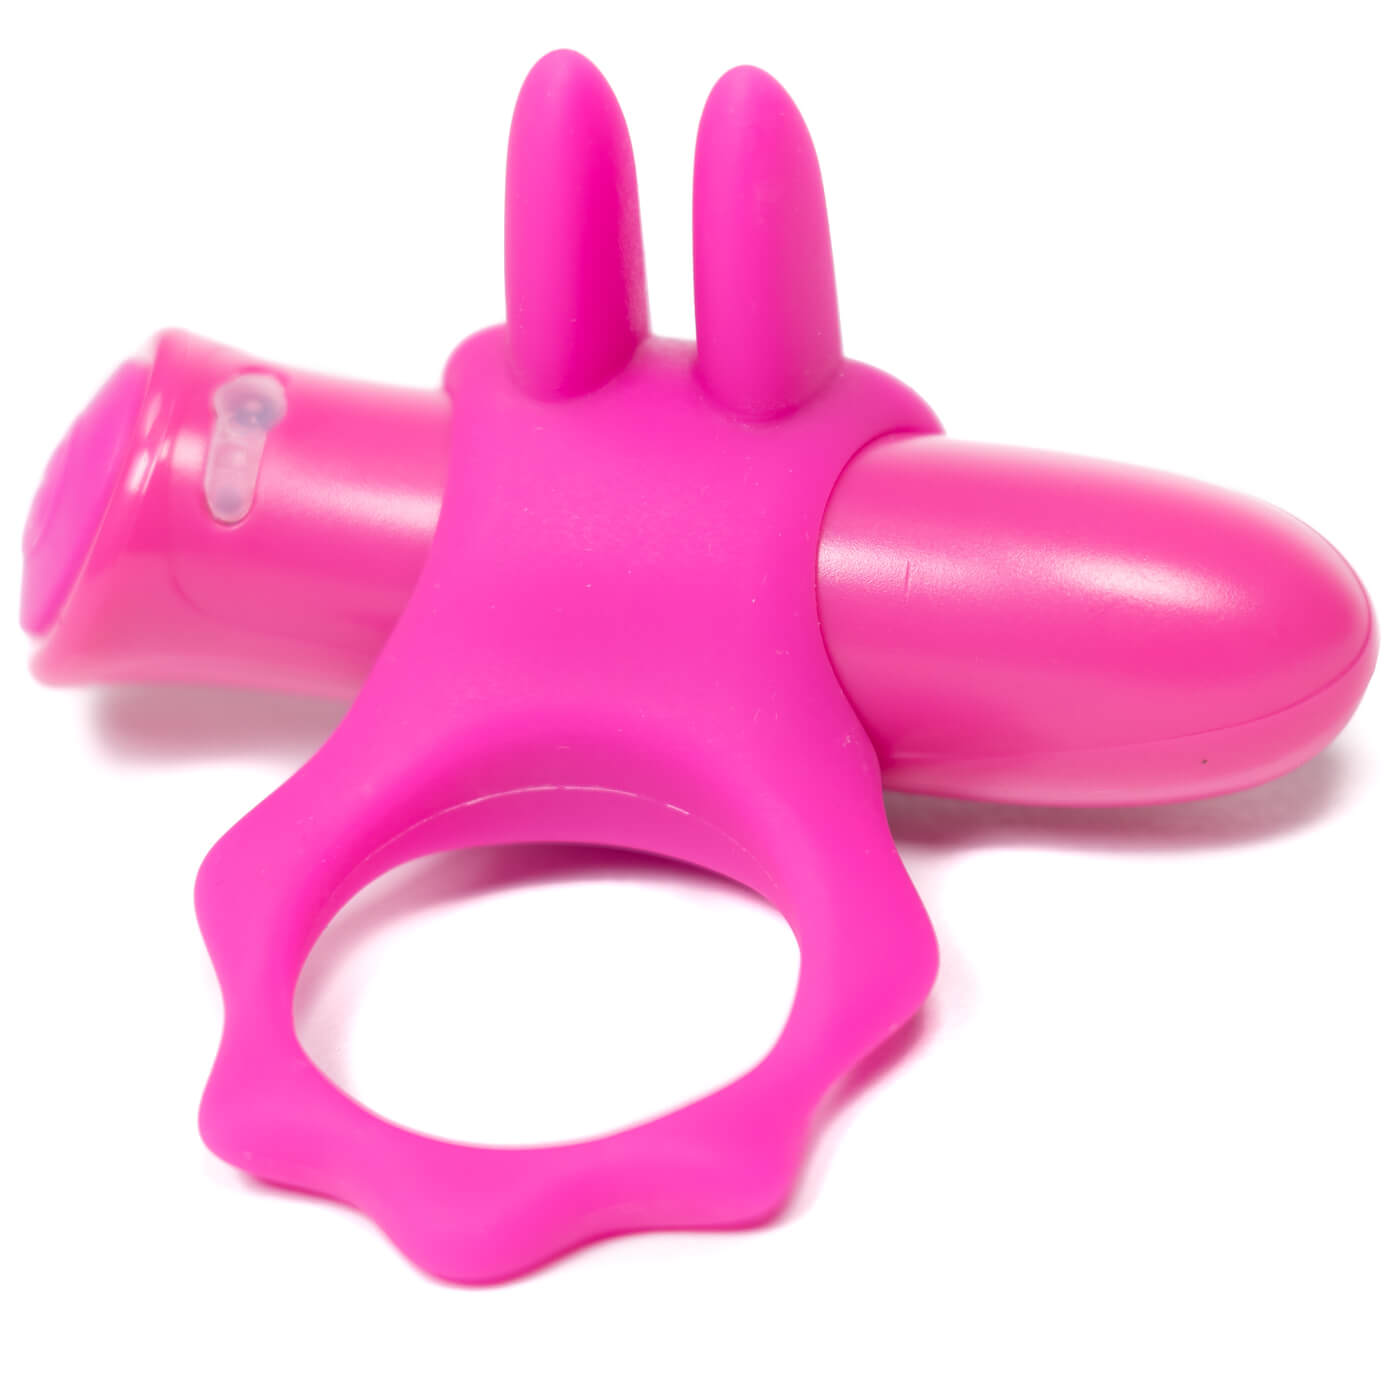 PLAY 7 Function Push Button Powerful Rechargeable Waterproof Vibrating Cock Ring